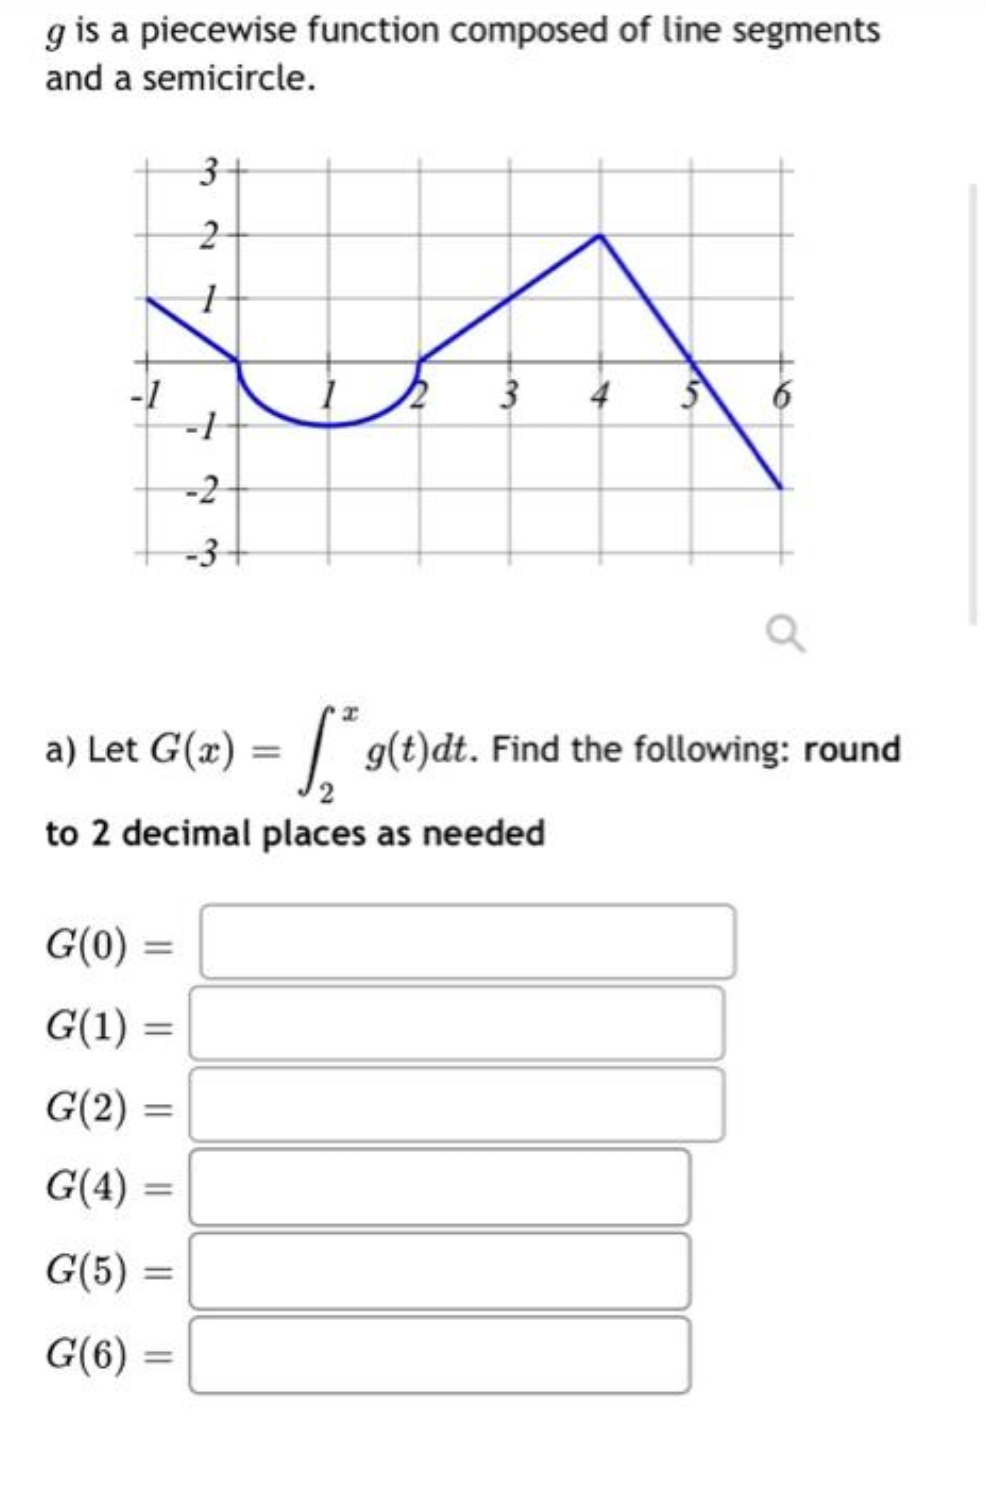 g is a piecewise function composed of line segments
and a semicircle.
G(0)
G(1) =
=
G(2)
G(4)
G(5)=
G(6)=
a) Let G(x) = g(t)dt. Find the following: round
to 2 decimal places as needed
=
3
2
1
-
-1
-2
-3+
3 4
6